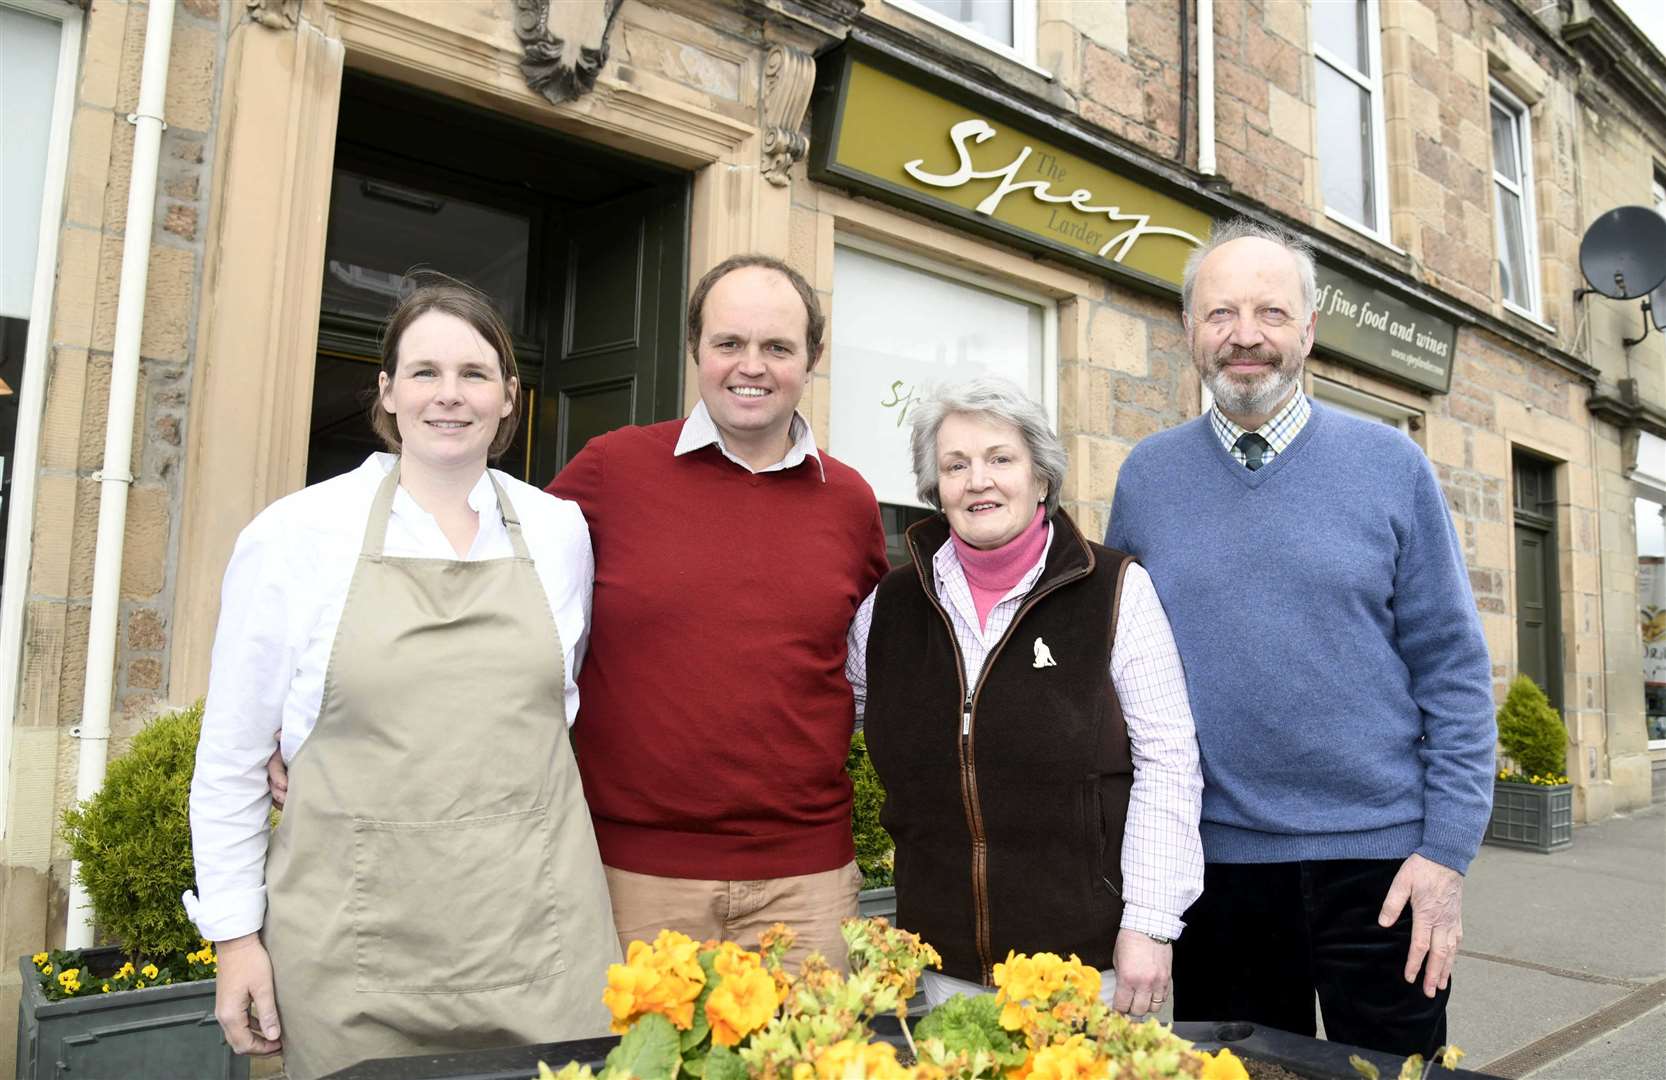 The Spey Larder's new owners John and Kate Smith with former owners David and Sheena Catto. Picture: Becky Saunderson